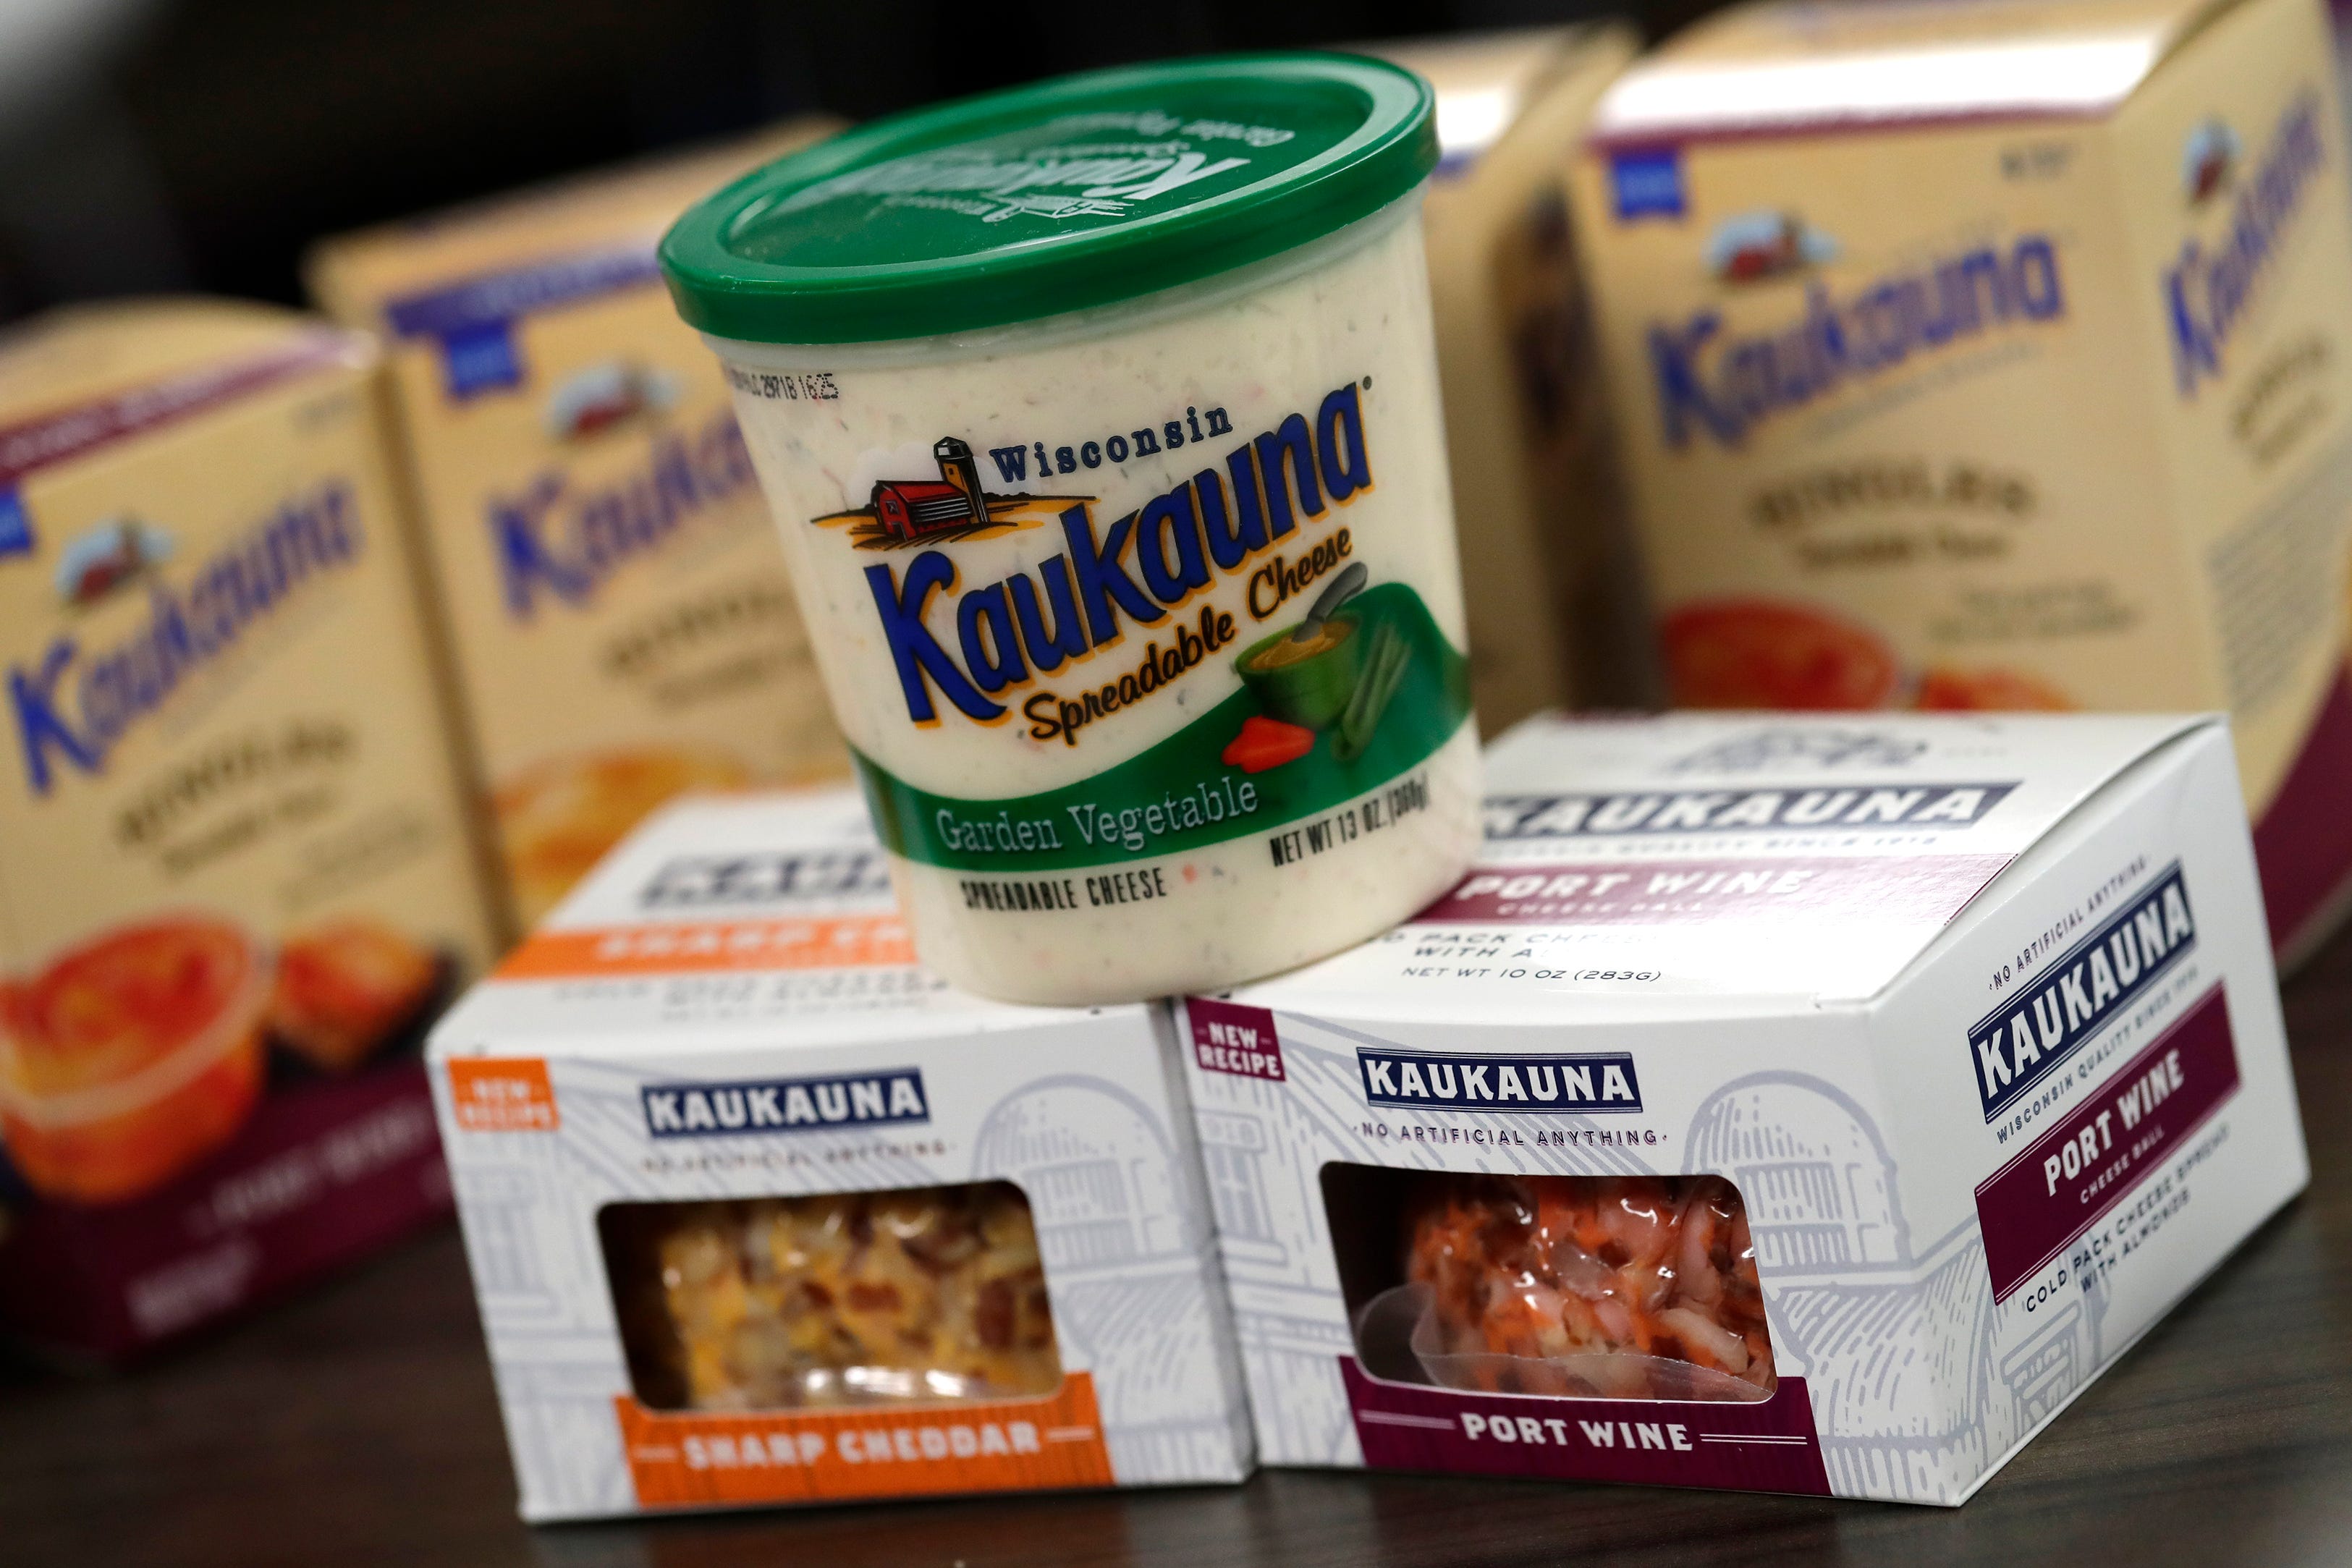 Kaukauna Cheese products may be the more recognizable entity, but the Wisconsinites know the city.